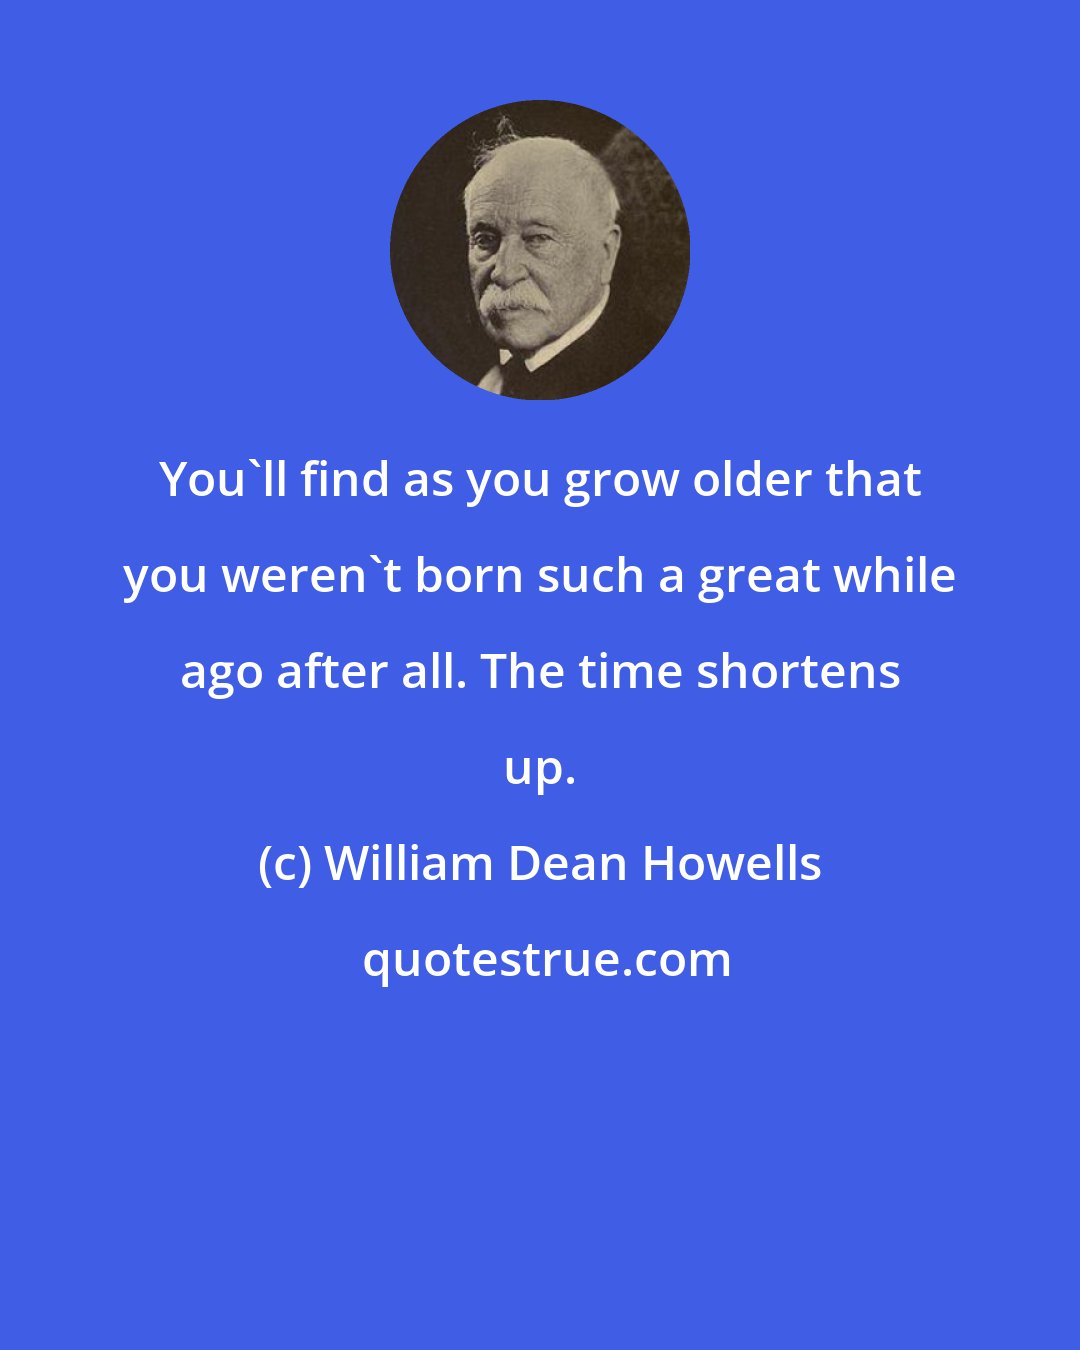 William Dean Howells: You'll find as you grow older that you weren't born such a great while ago after all. The time shortens up.